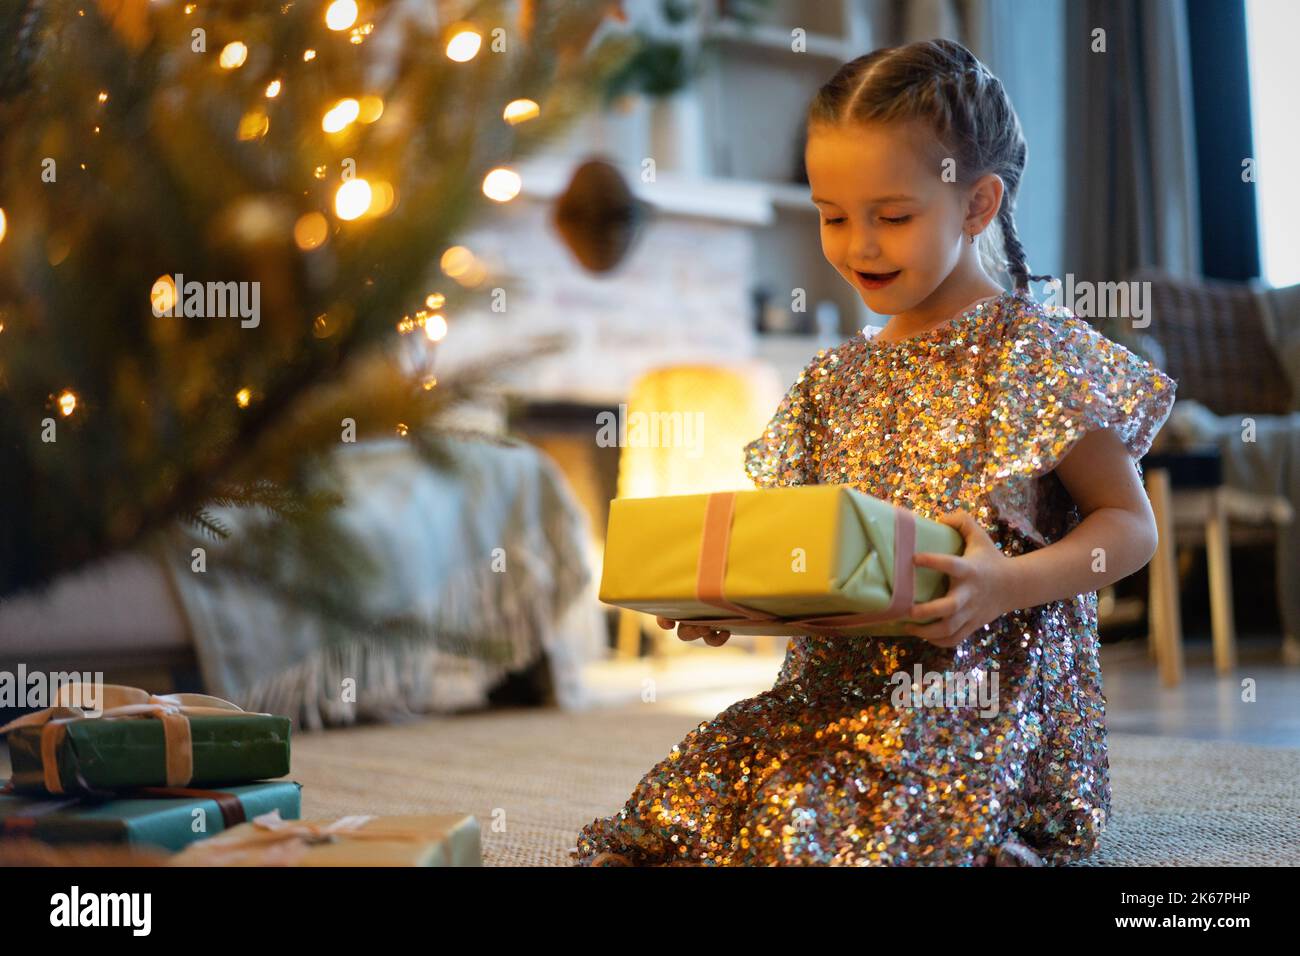 Happy holidays. Little child opening present near Christmas tree. The girl laughing and enjoying the gift. Stock Photo